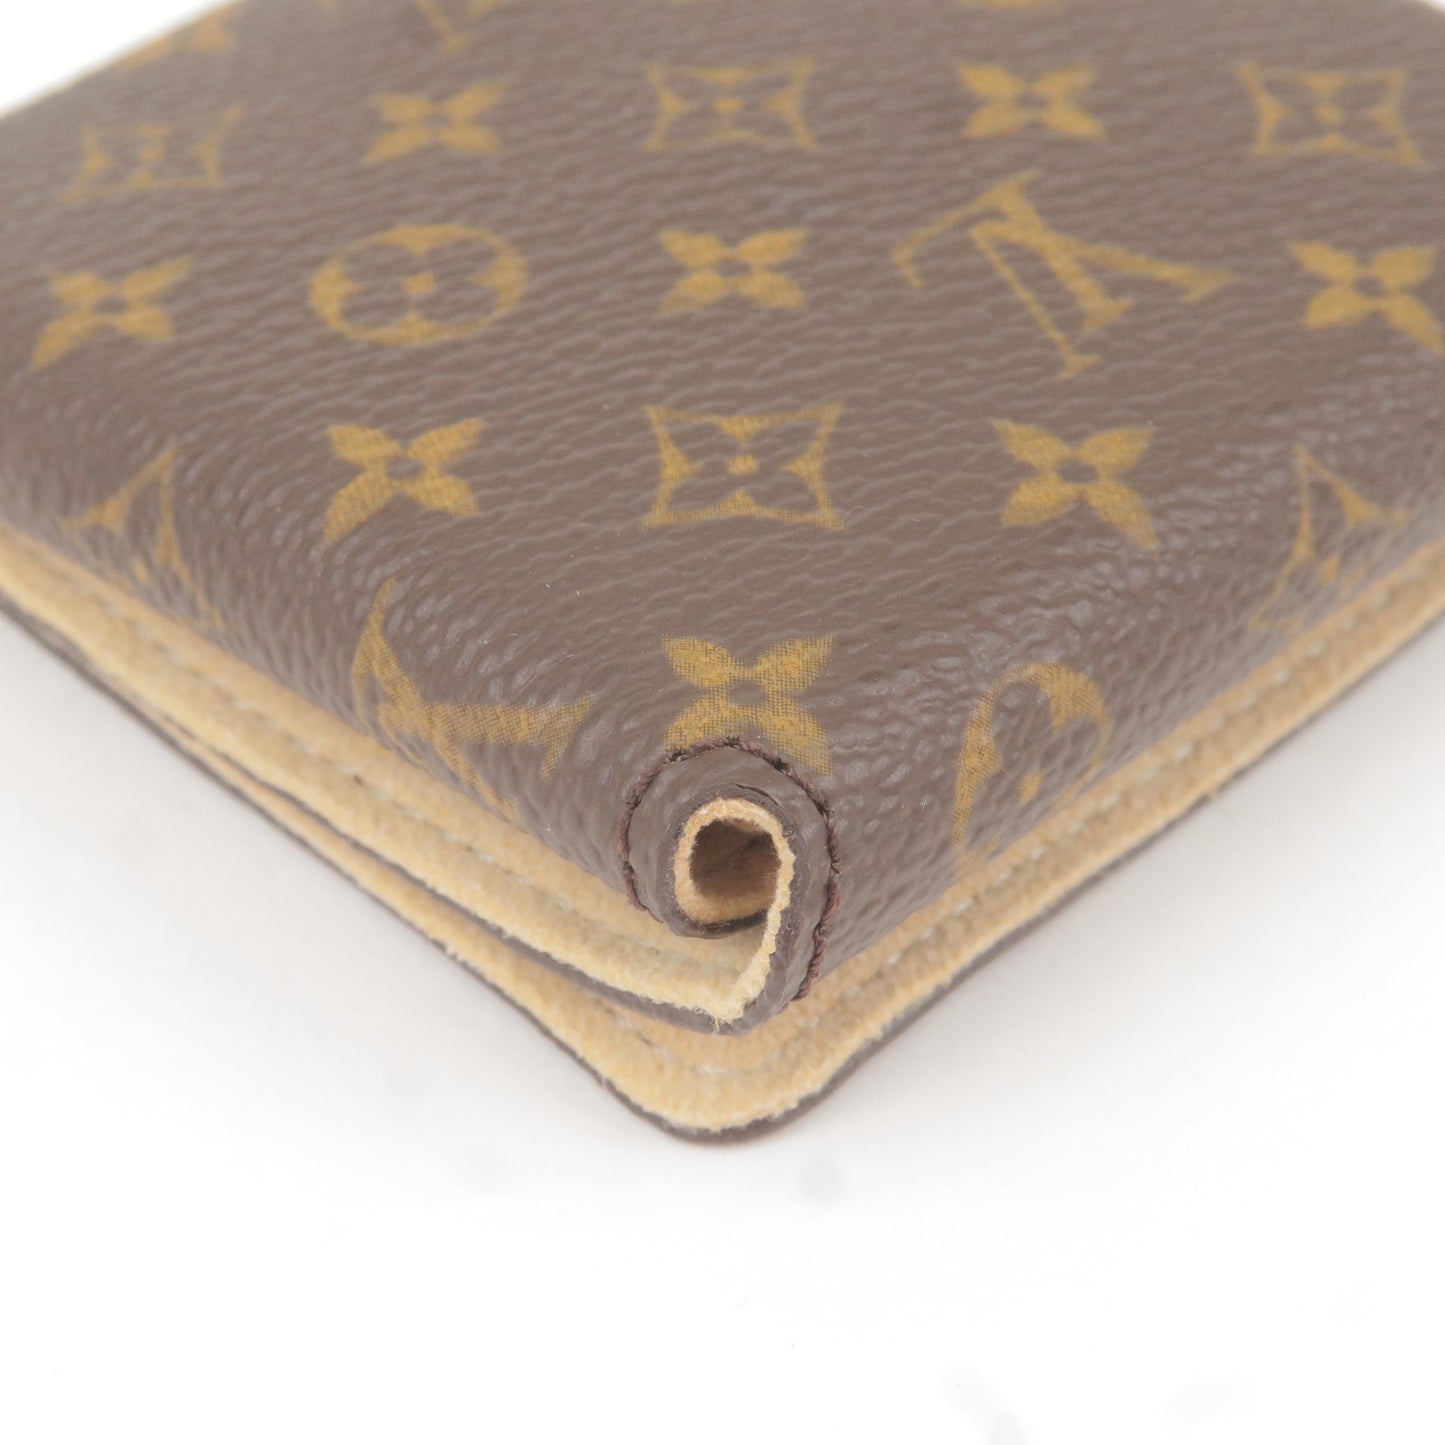 Louis Vuitton's accessories and jewelry are all about the monogram